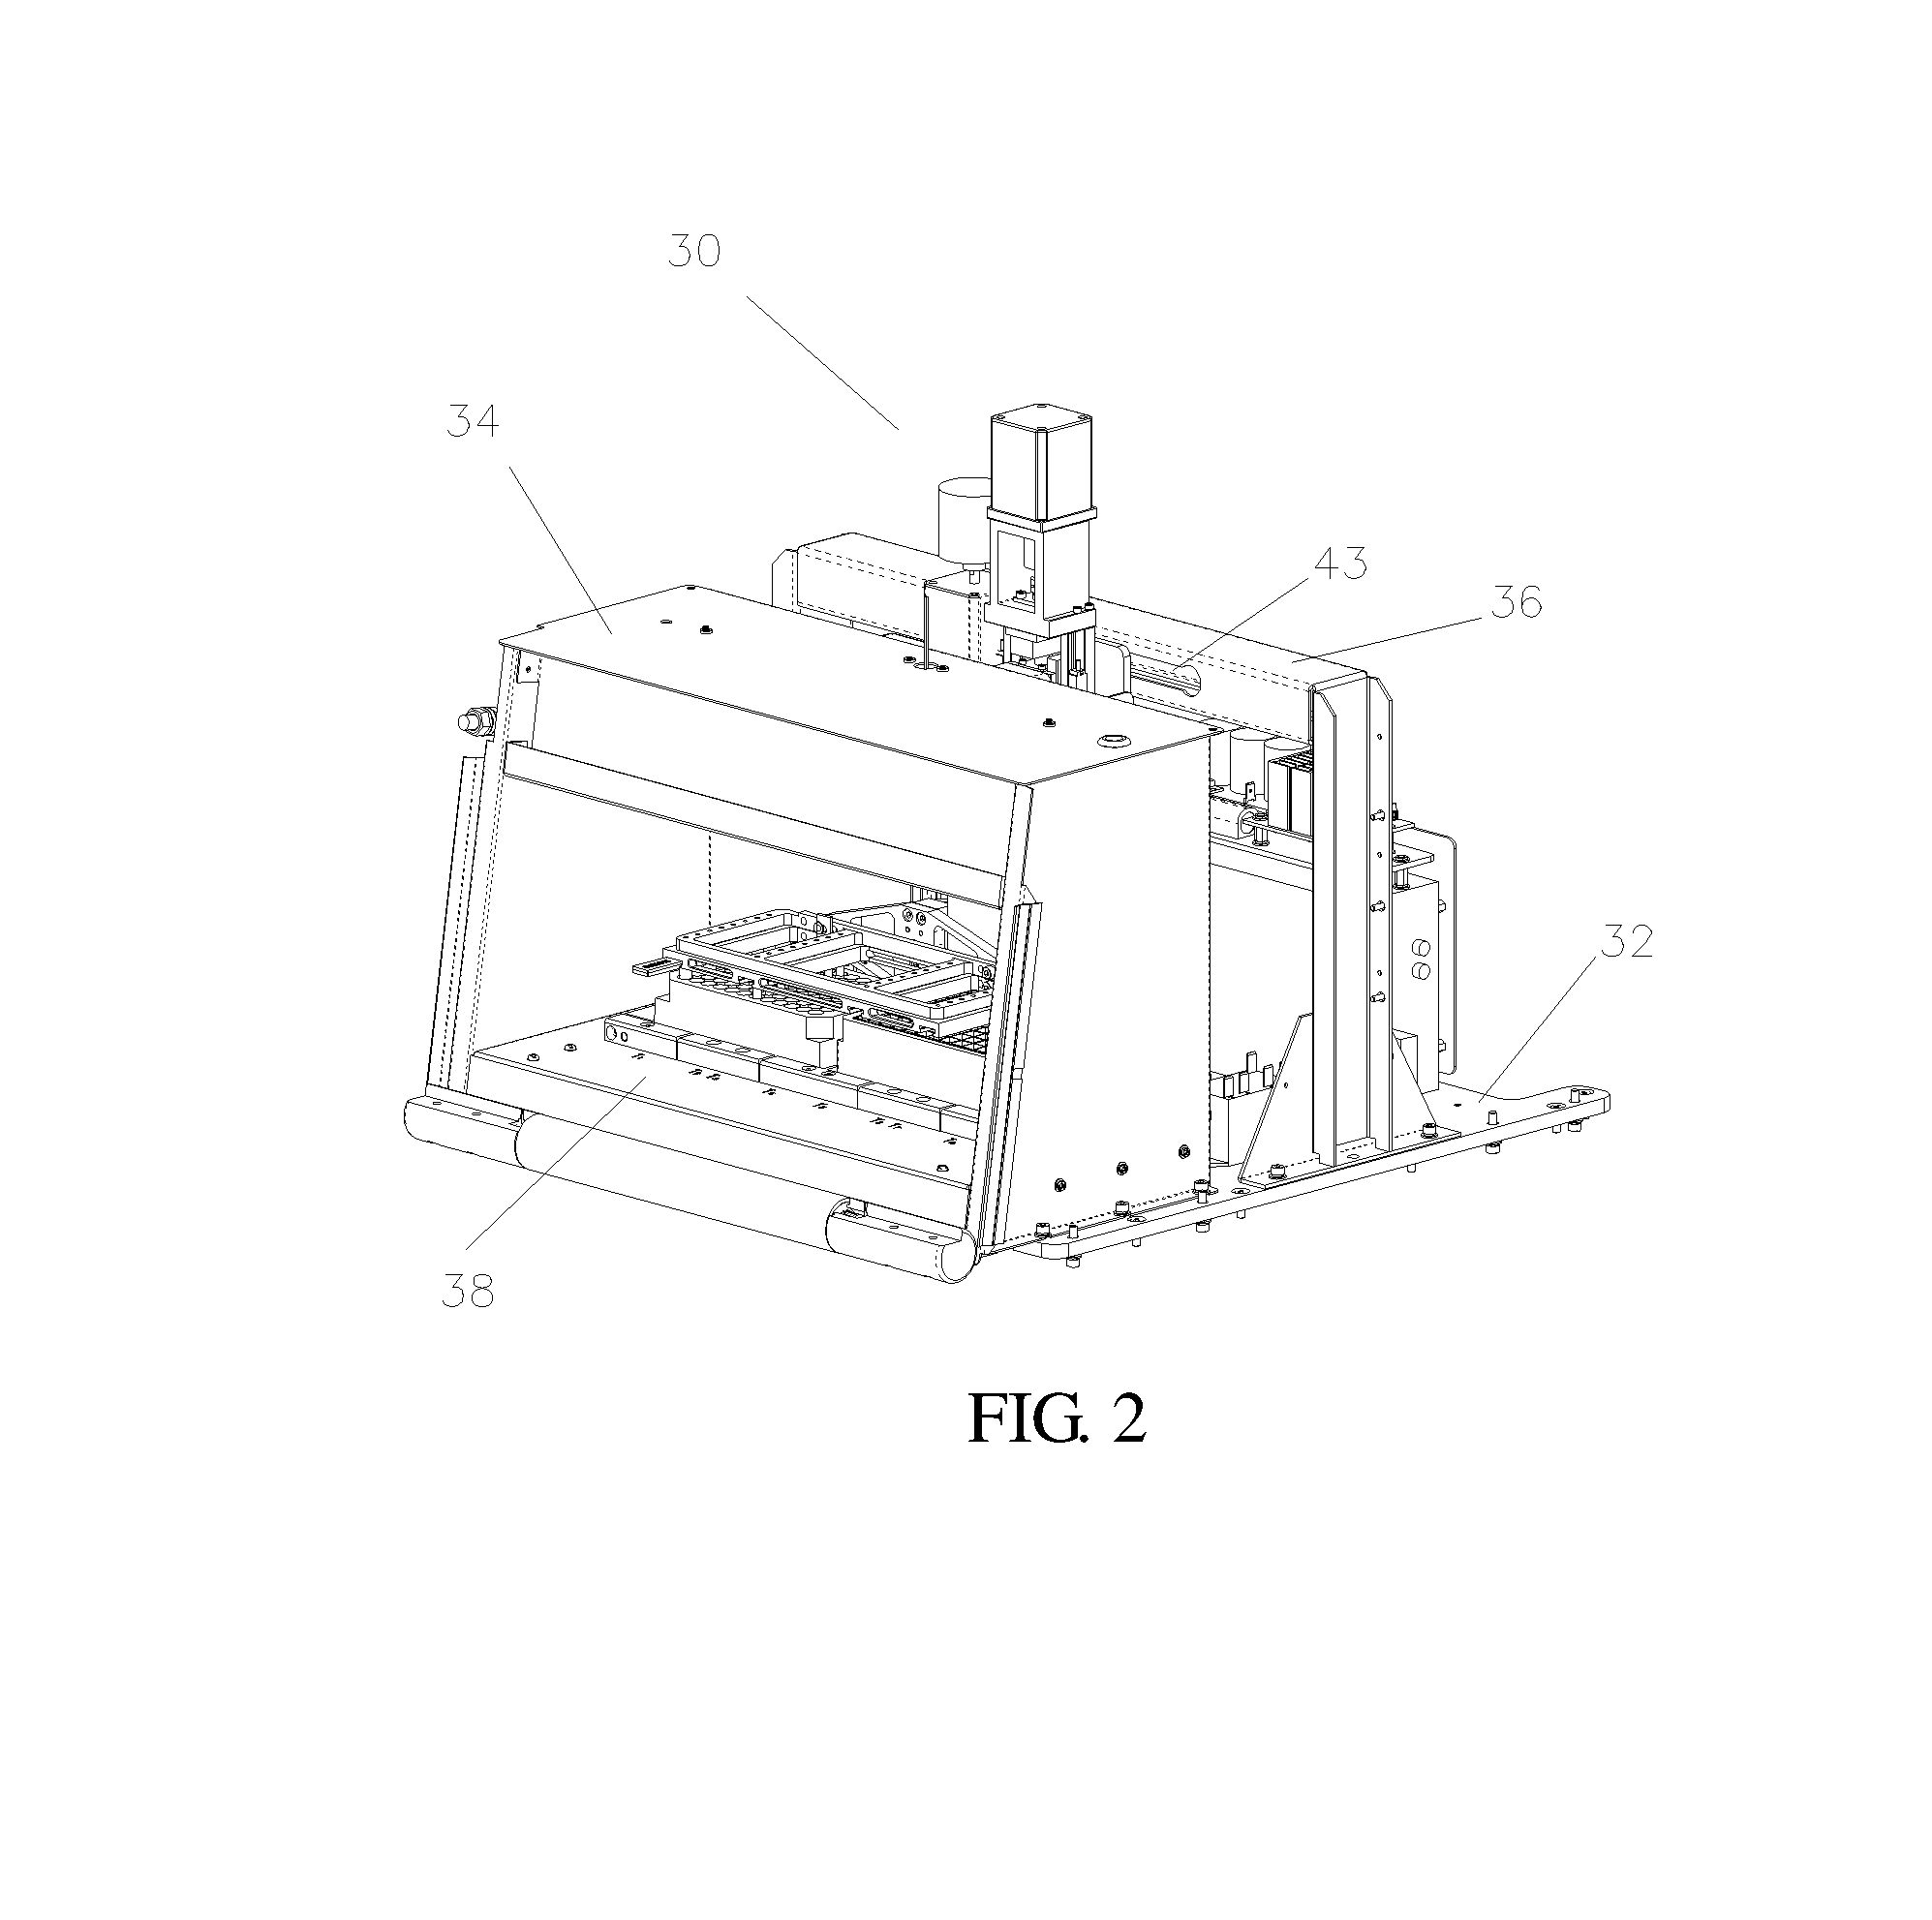 Nucleic acid extraction apparatus